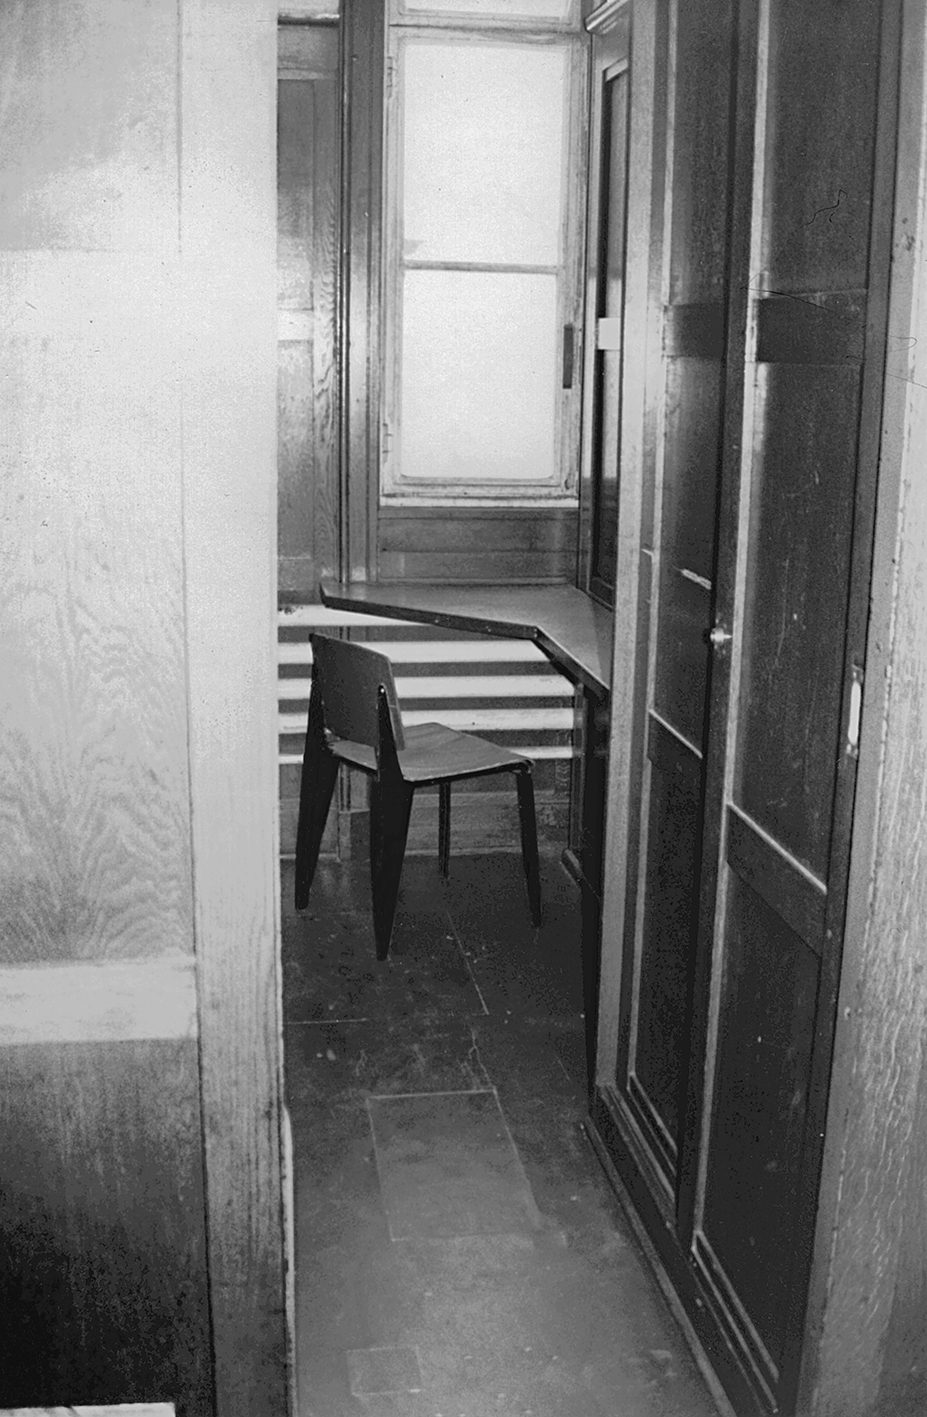 Boarding accommodations, Lycée Fabert, Metz (architects R. Parisot and P. Millochau, 1936). A bedroom, with corner work table and chair no. 4.